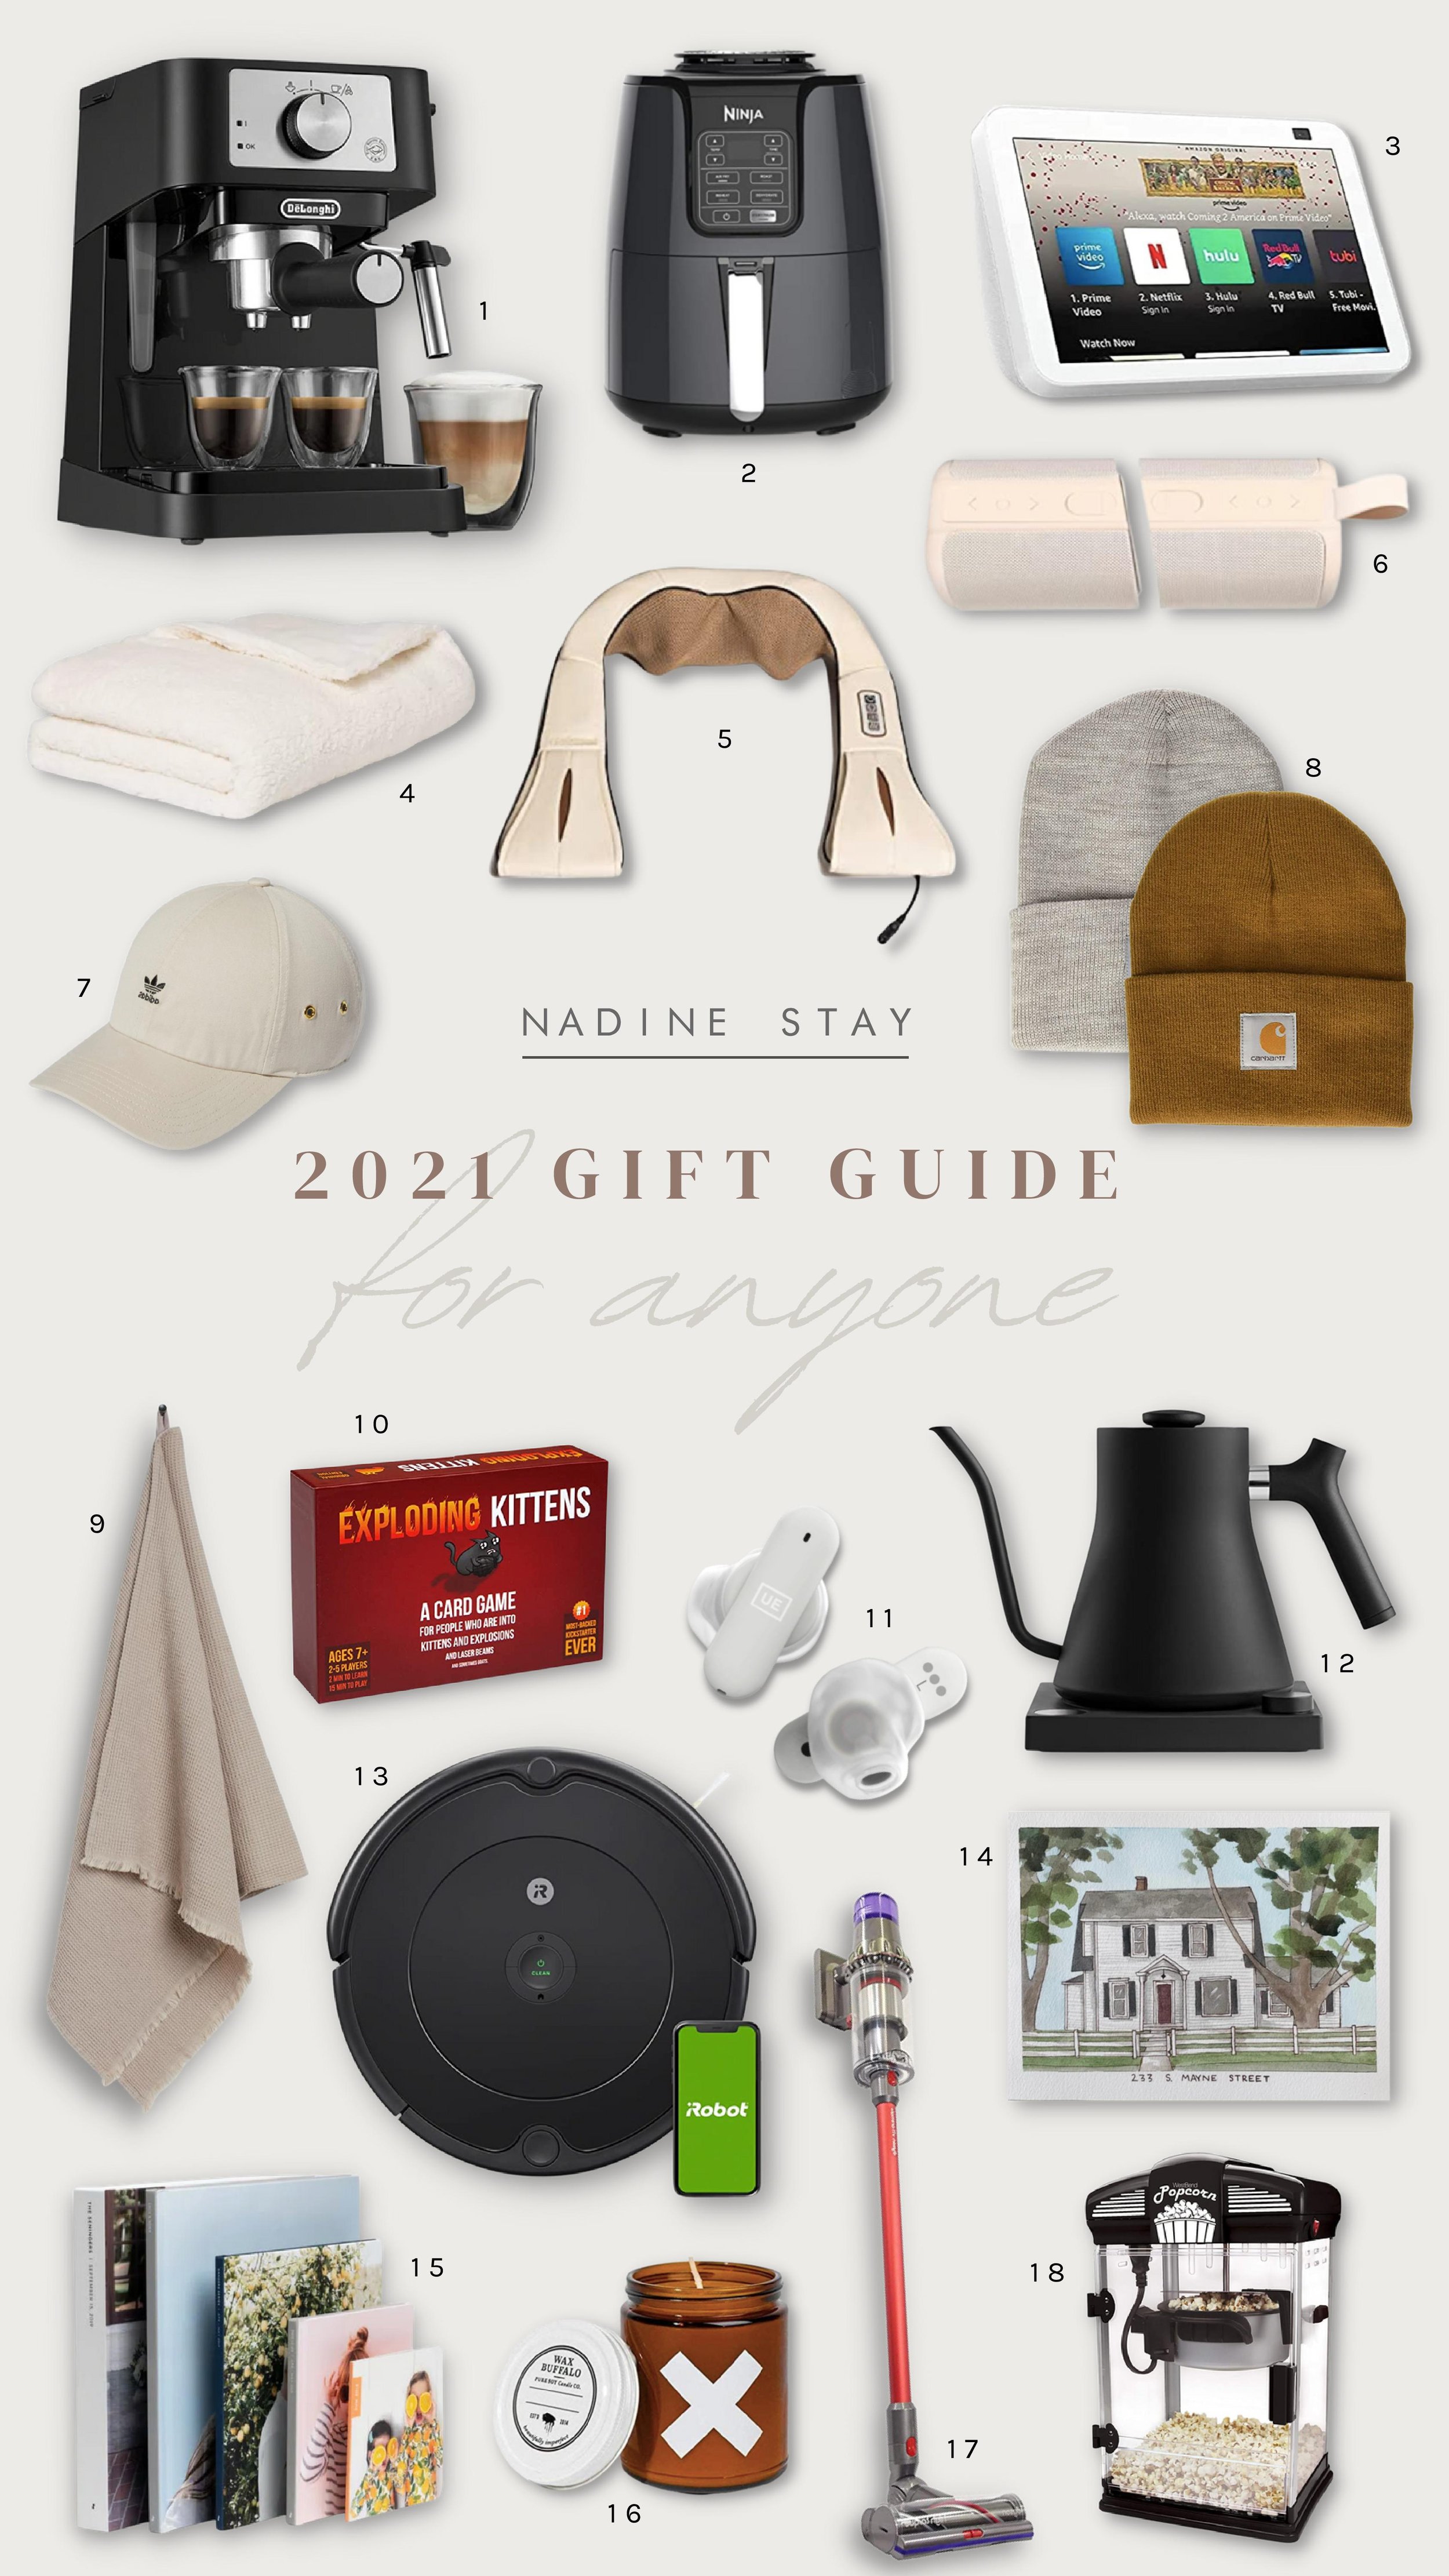 2021 Holiday Gift Guide For Him or Her - 18 gifts he or she will love. 19 gift ideas for your anyone. Gadgets, cooking appliances, home goods, meaningful presents, and more that you can gift him or her this Christmas. | Nadine Stay